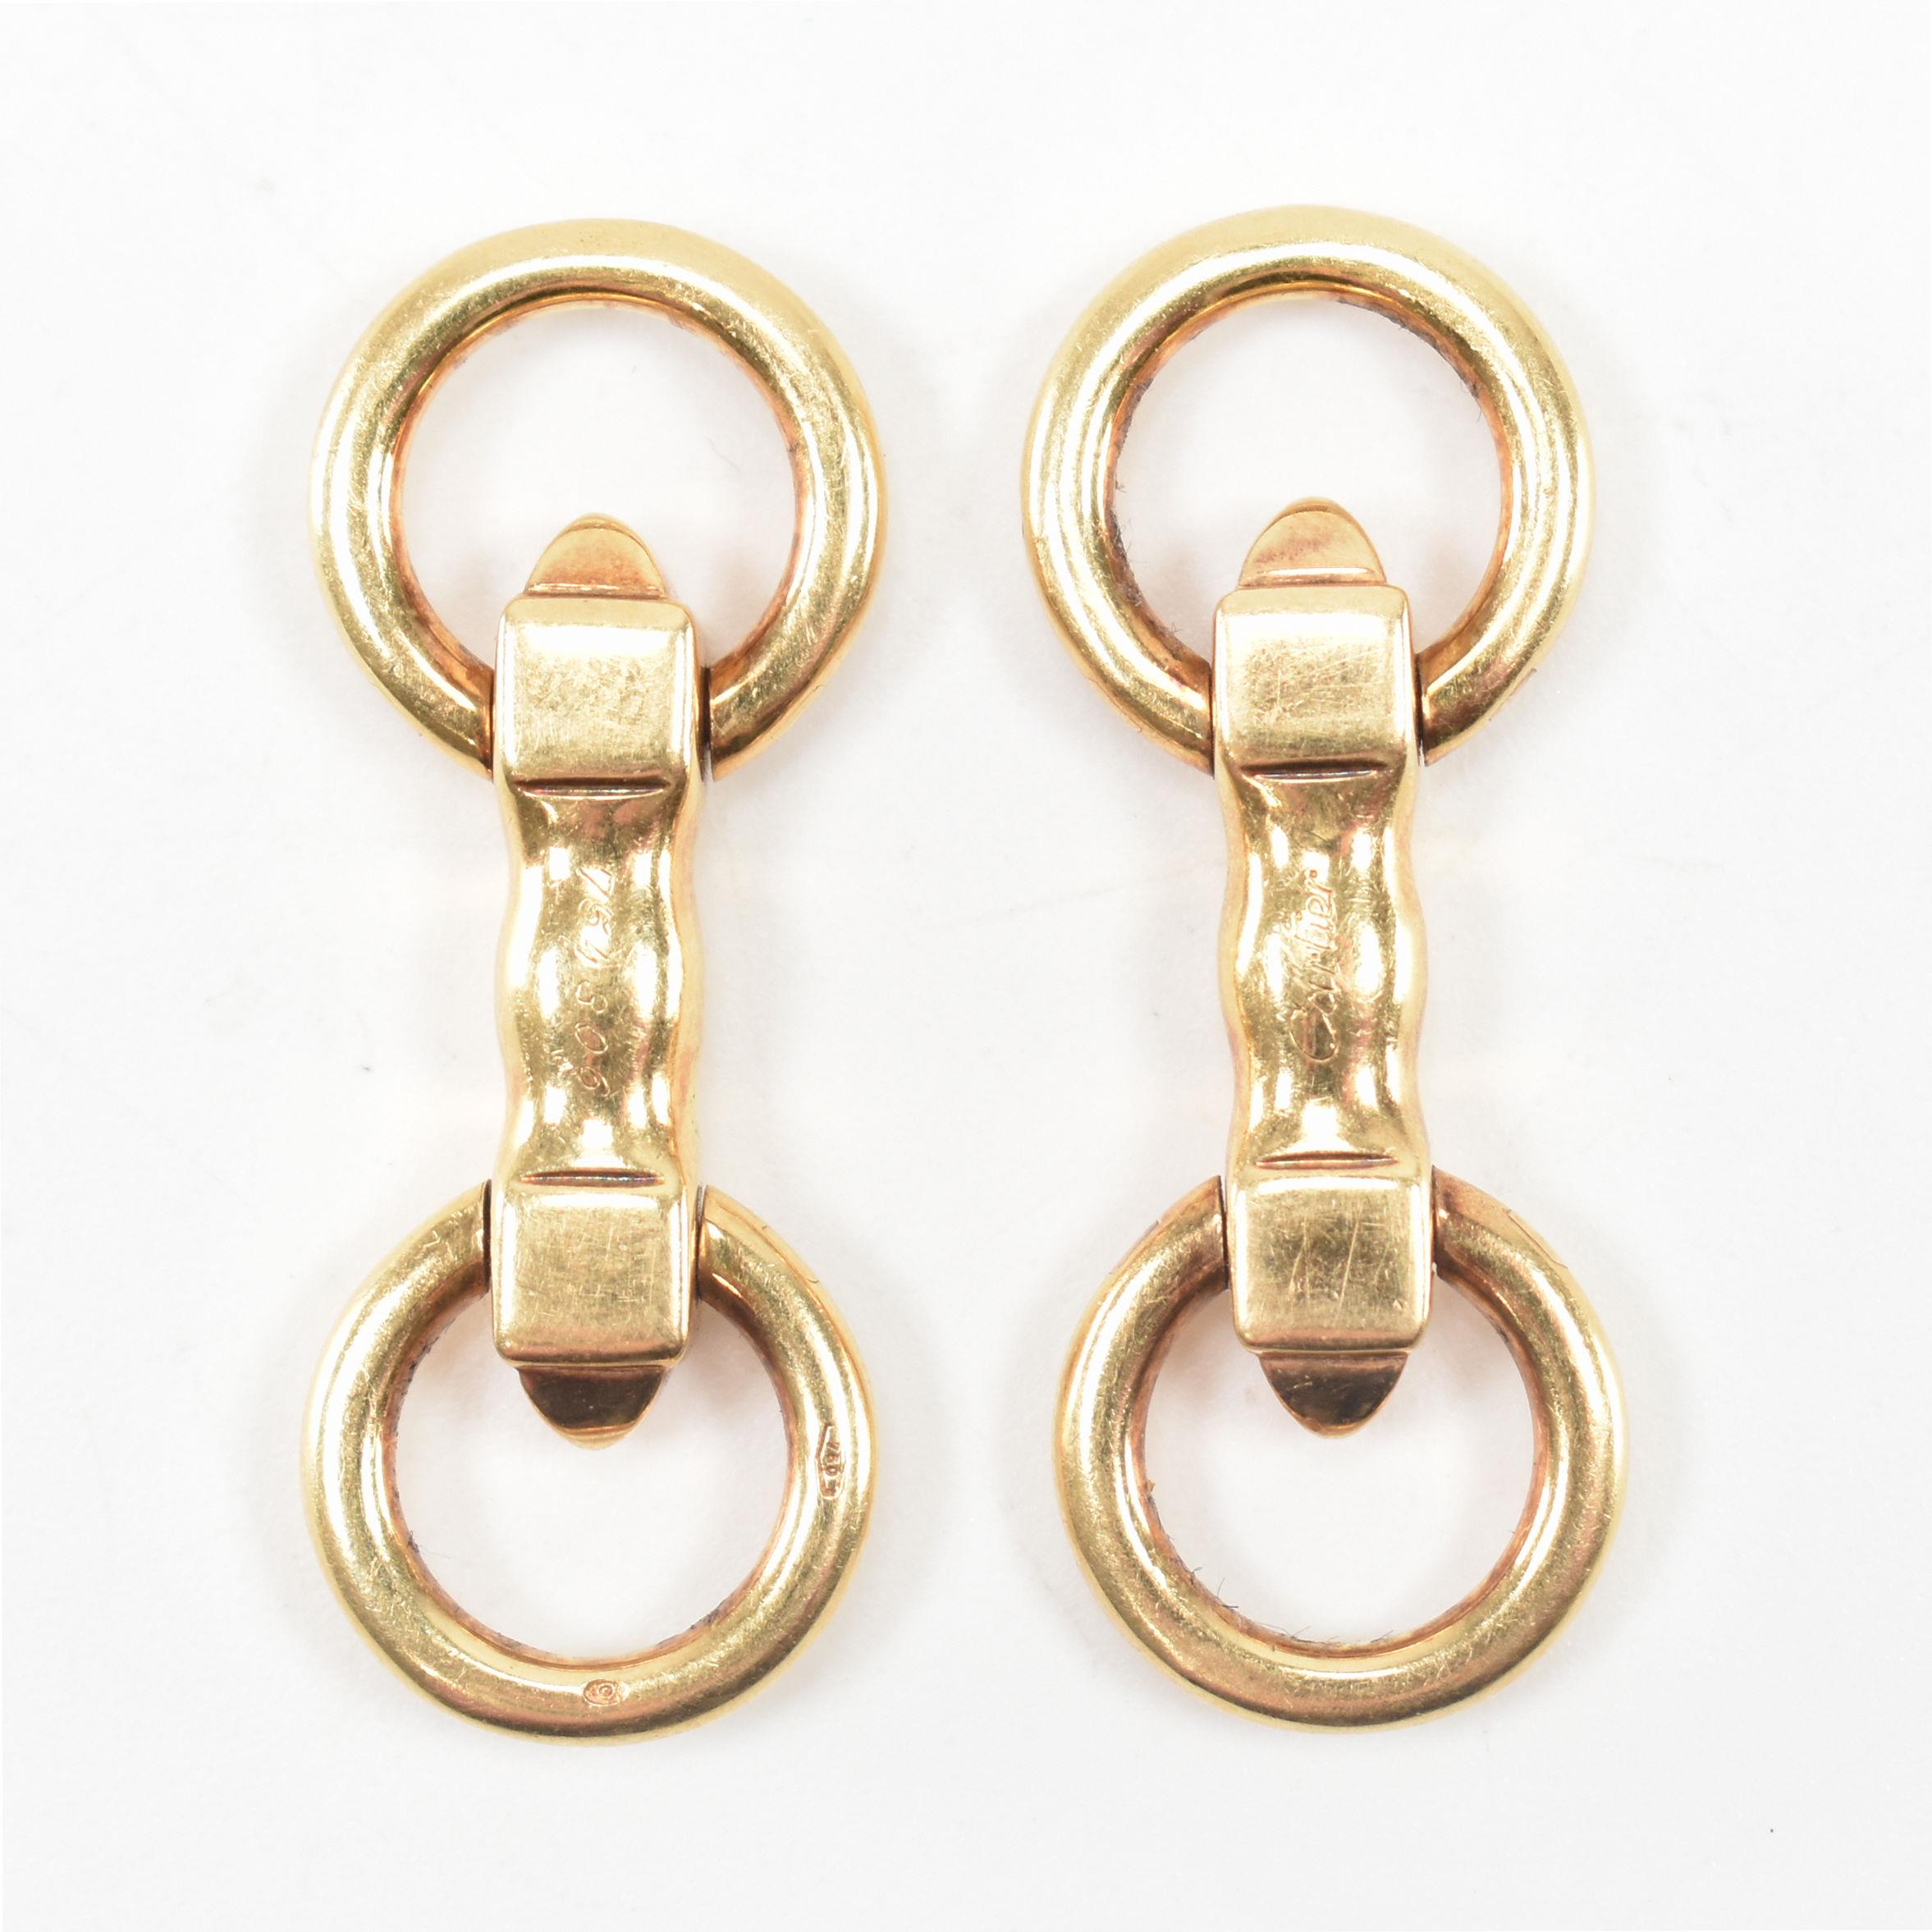 PAIR OF 18CT GOLD STIRRUP CUFFLINKS SINGED CARTIER - Image 2 of 5